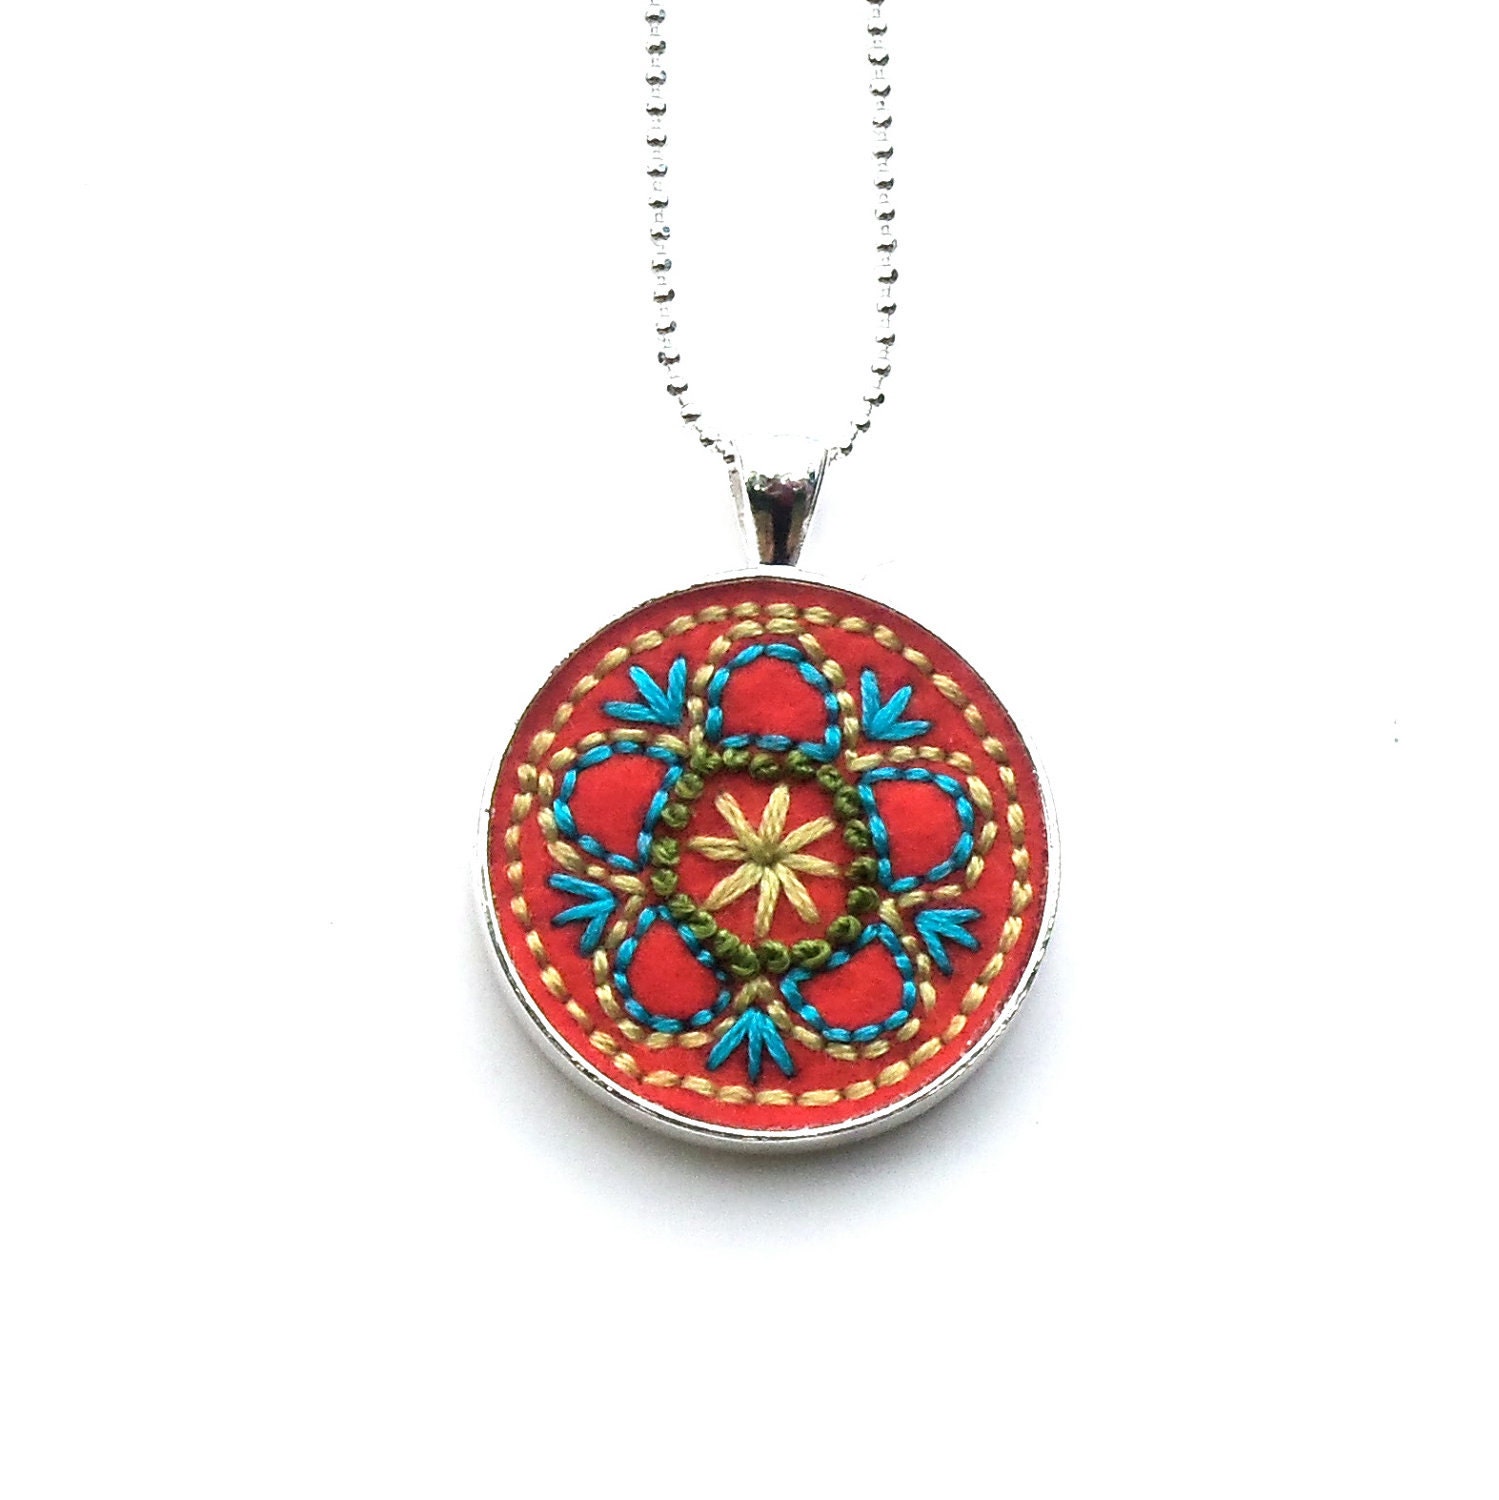 Flower vintage inspired hand embroidered pendant, Tangerine with Blue and Greens - atinyforest